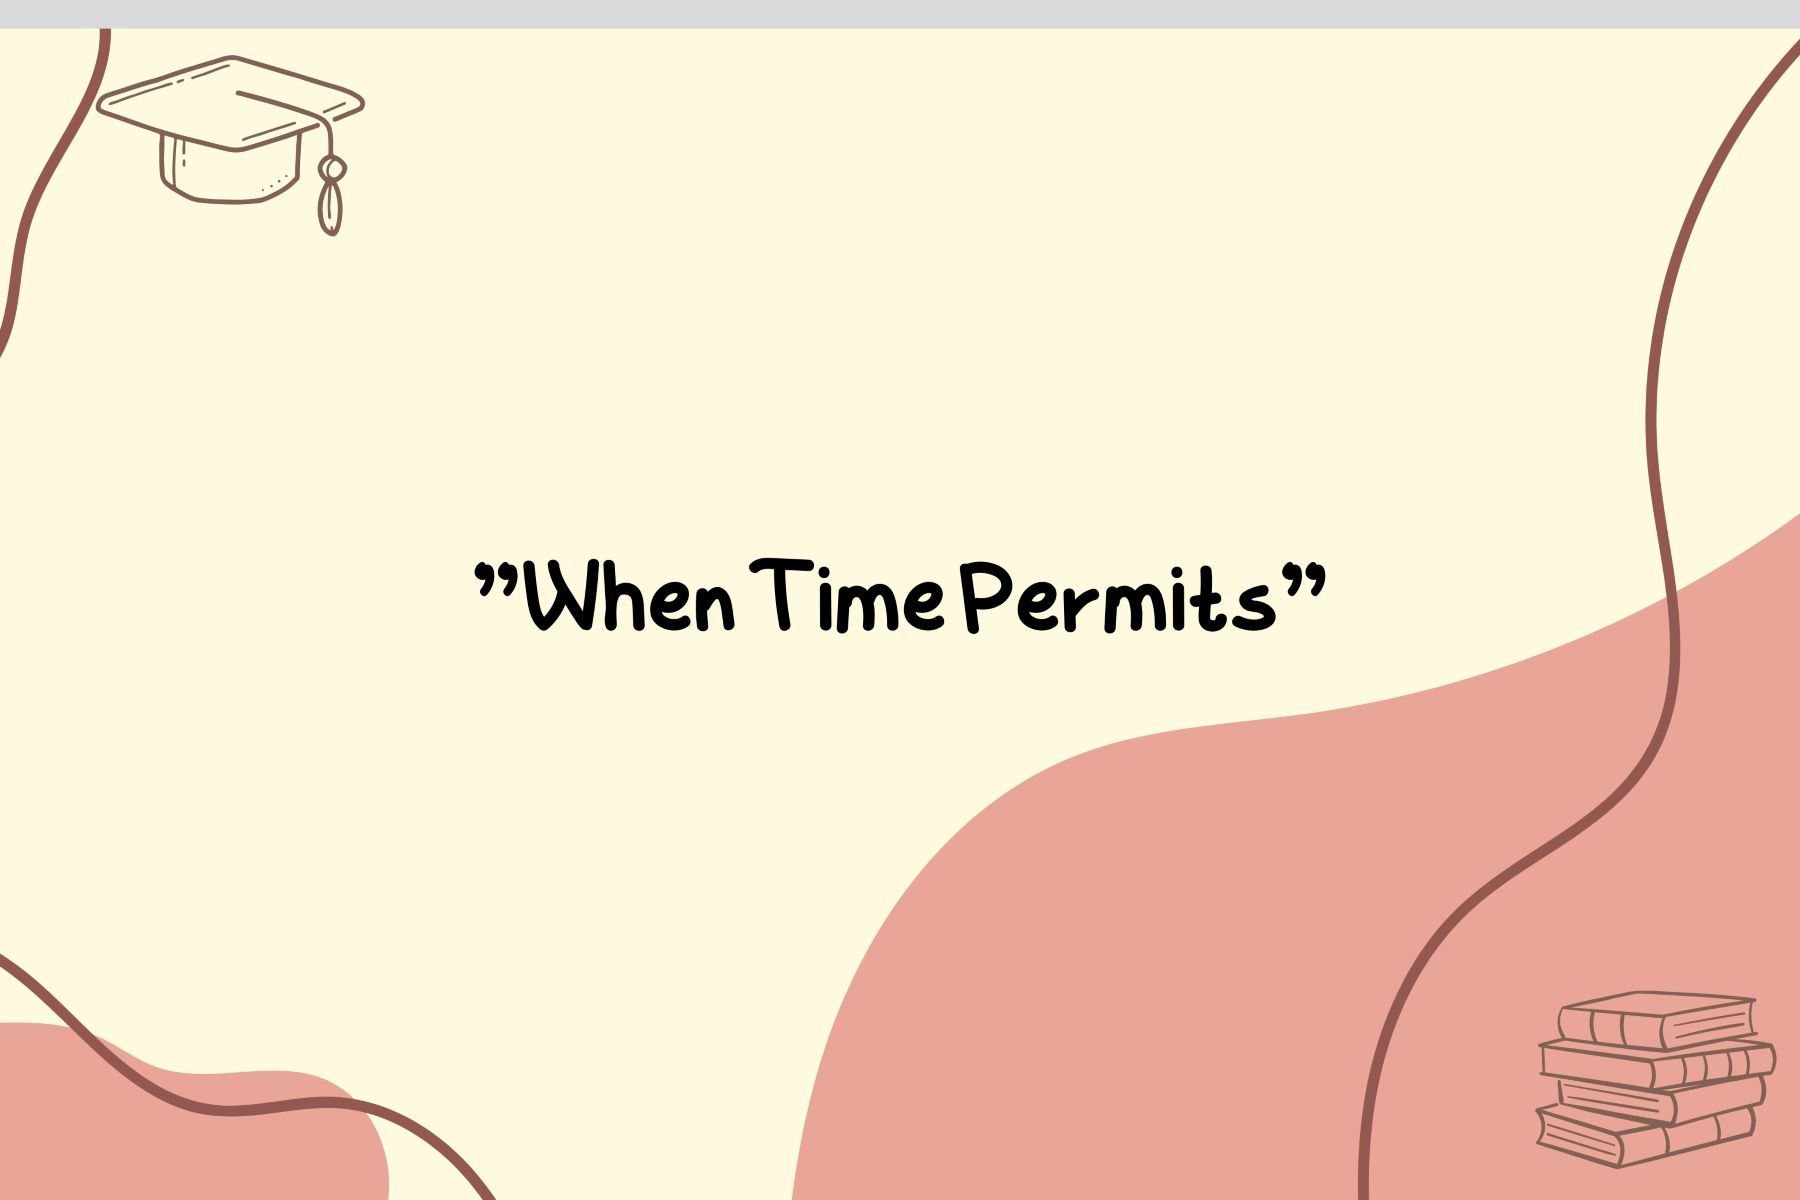 “When Time Permits” Definition And Meaning